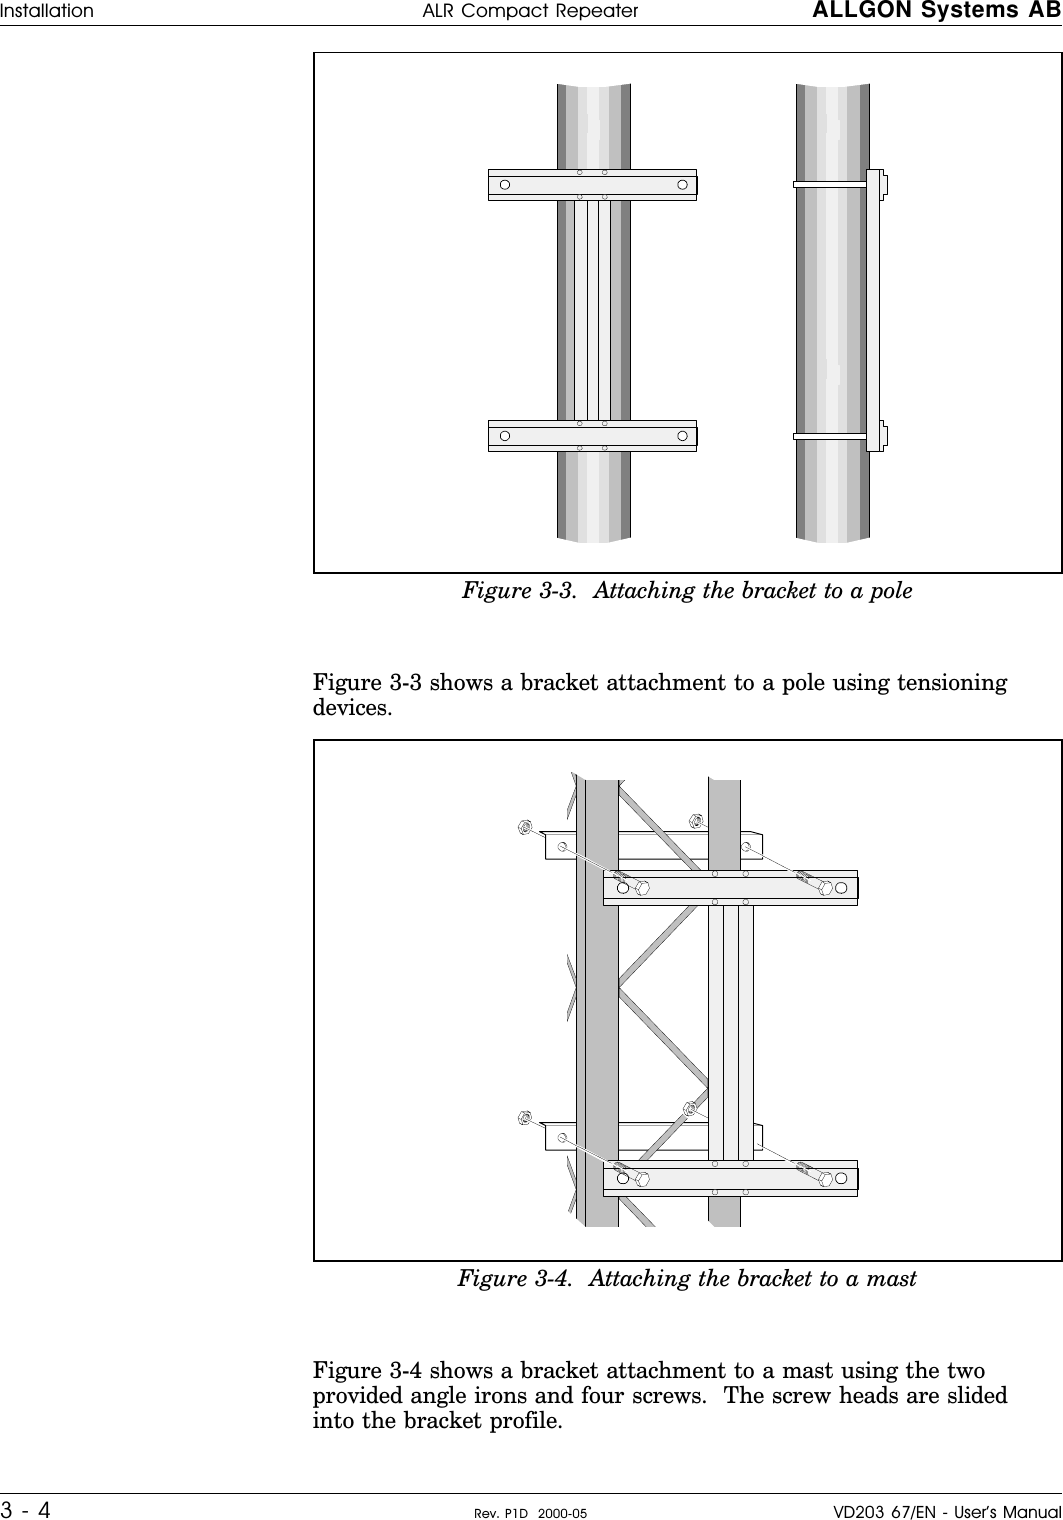    Figure 3-3 shows a bracket attachment to a pole using tensioningdevices.Figure 3-4 shows a bracket attachment to a mast using the twoprovided angle irons and four screws.  The screw heads are slidedinto the bracket profile.Figure 3-3.  Attaching the bracket to a poleFigure 3-4.  Attaching the bracket to a mastInstallation ALR Compact Repeater ALLGON Systems AB3 - 4 Rev. P1D  2000-05 VD203 67/EN - User’s Manual